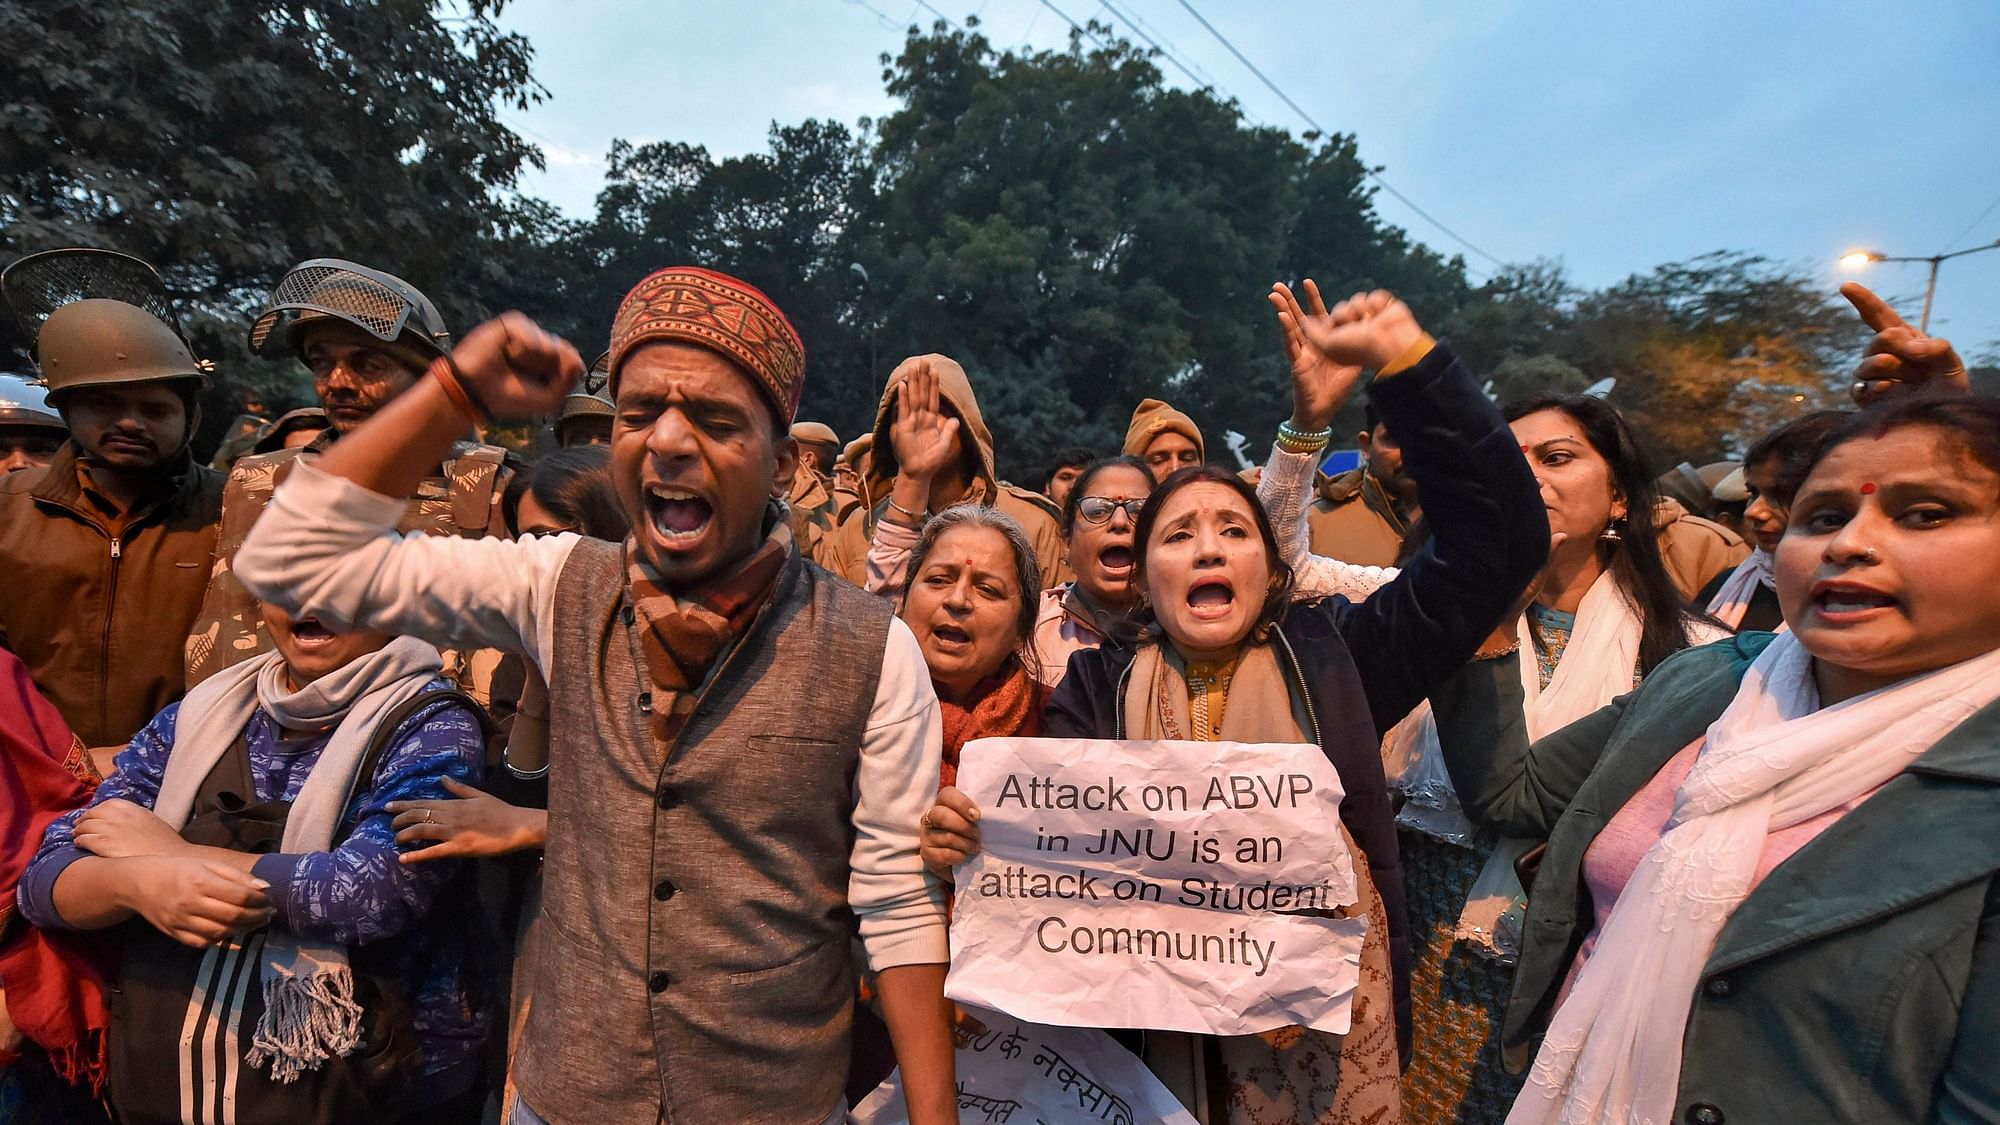 Students and activists across India and abroad protested in solidarity with the students of JNU who were attacked on Sunday, 5 January.